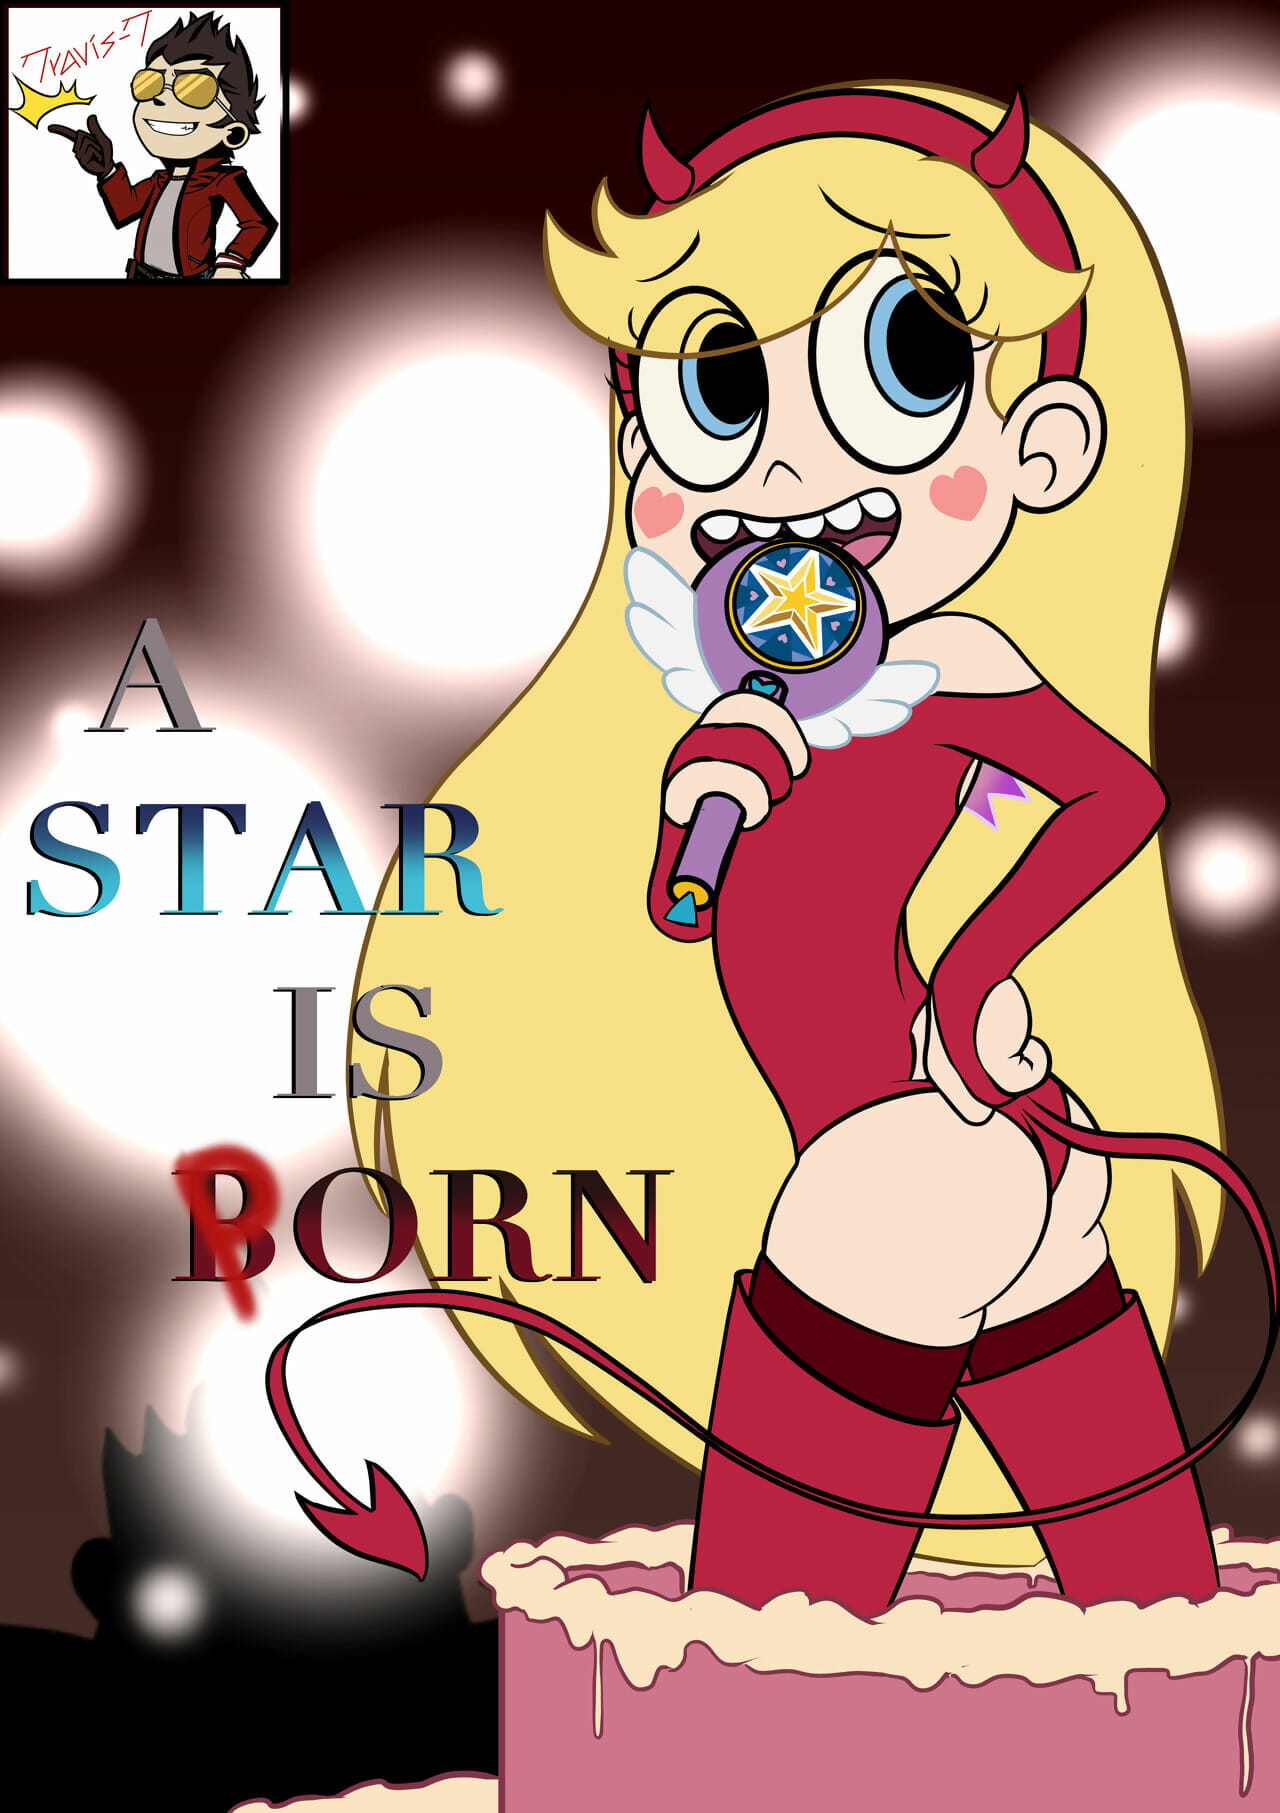 Travis-T A Star is Born Star vs. the Forces of Evil Ongoing